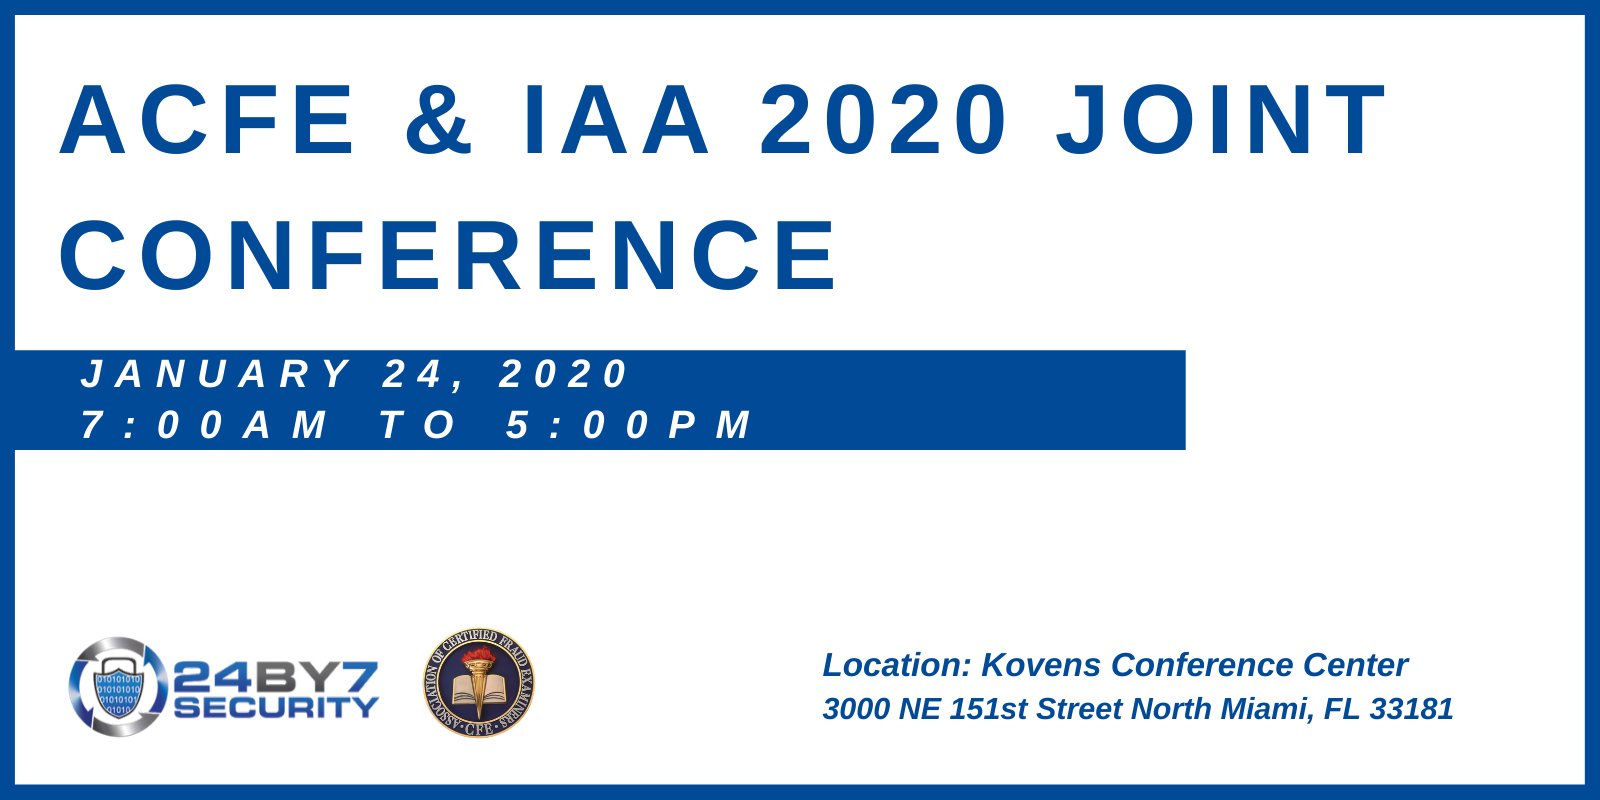 ACFE & IAA 2020 Joint Conference